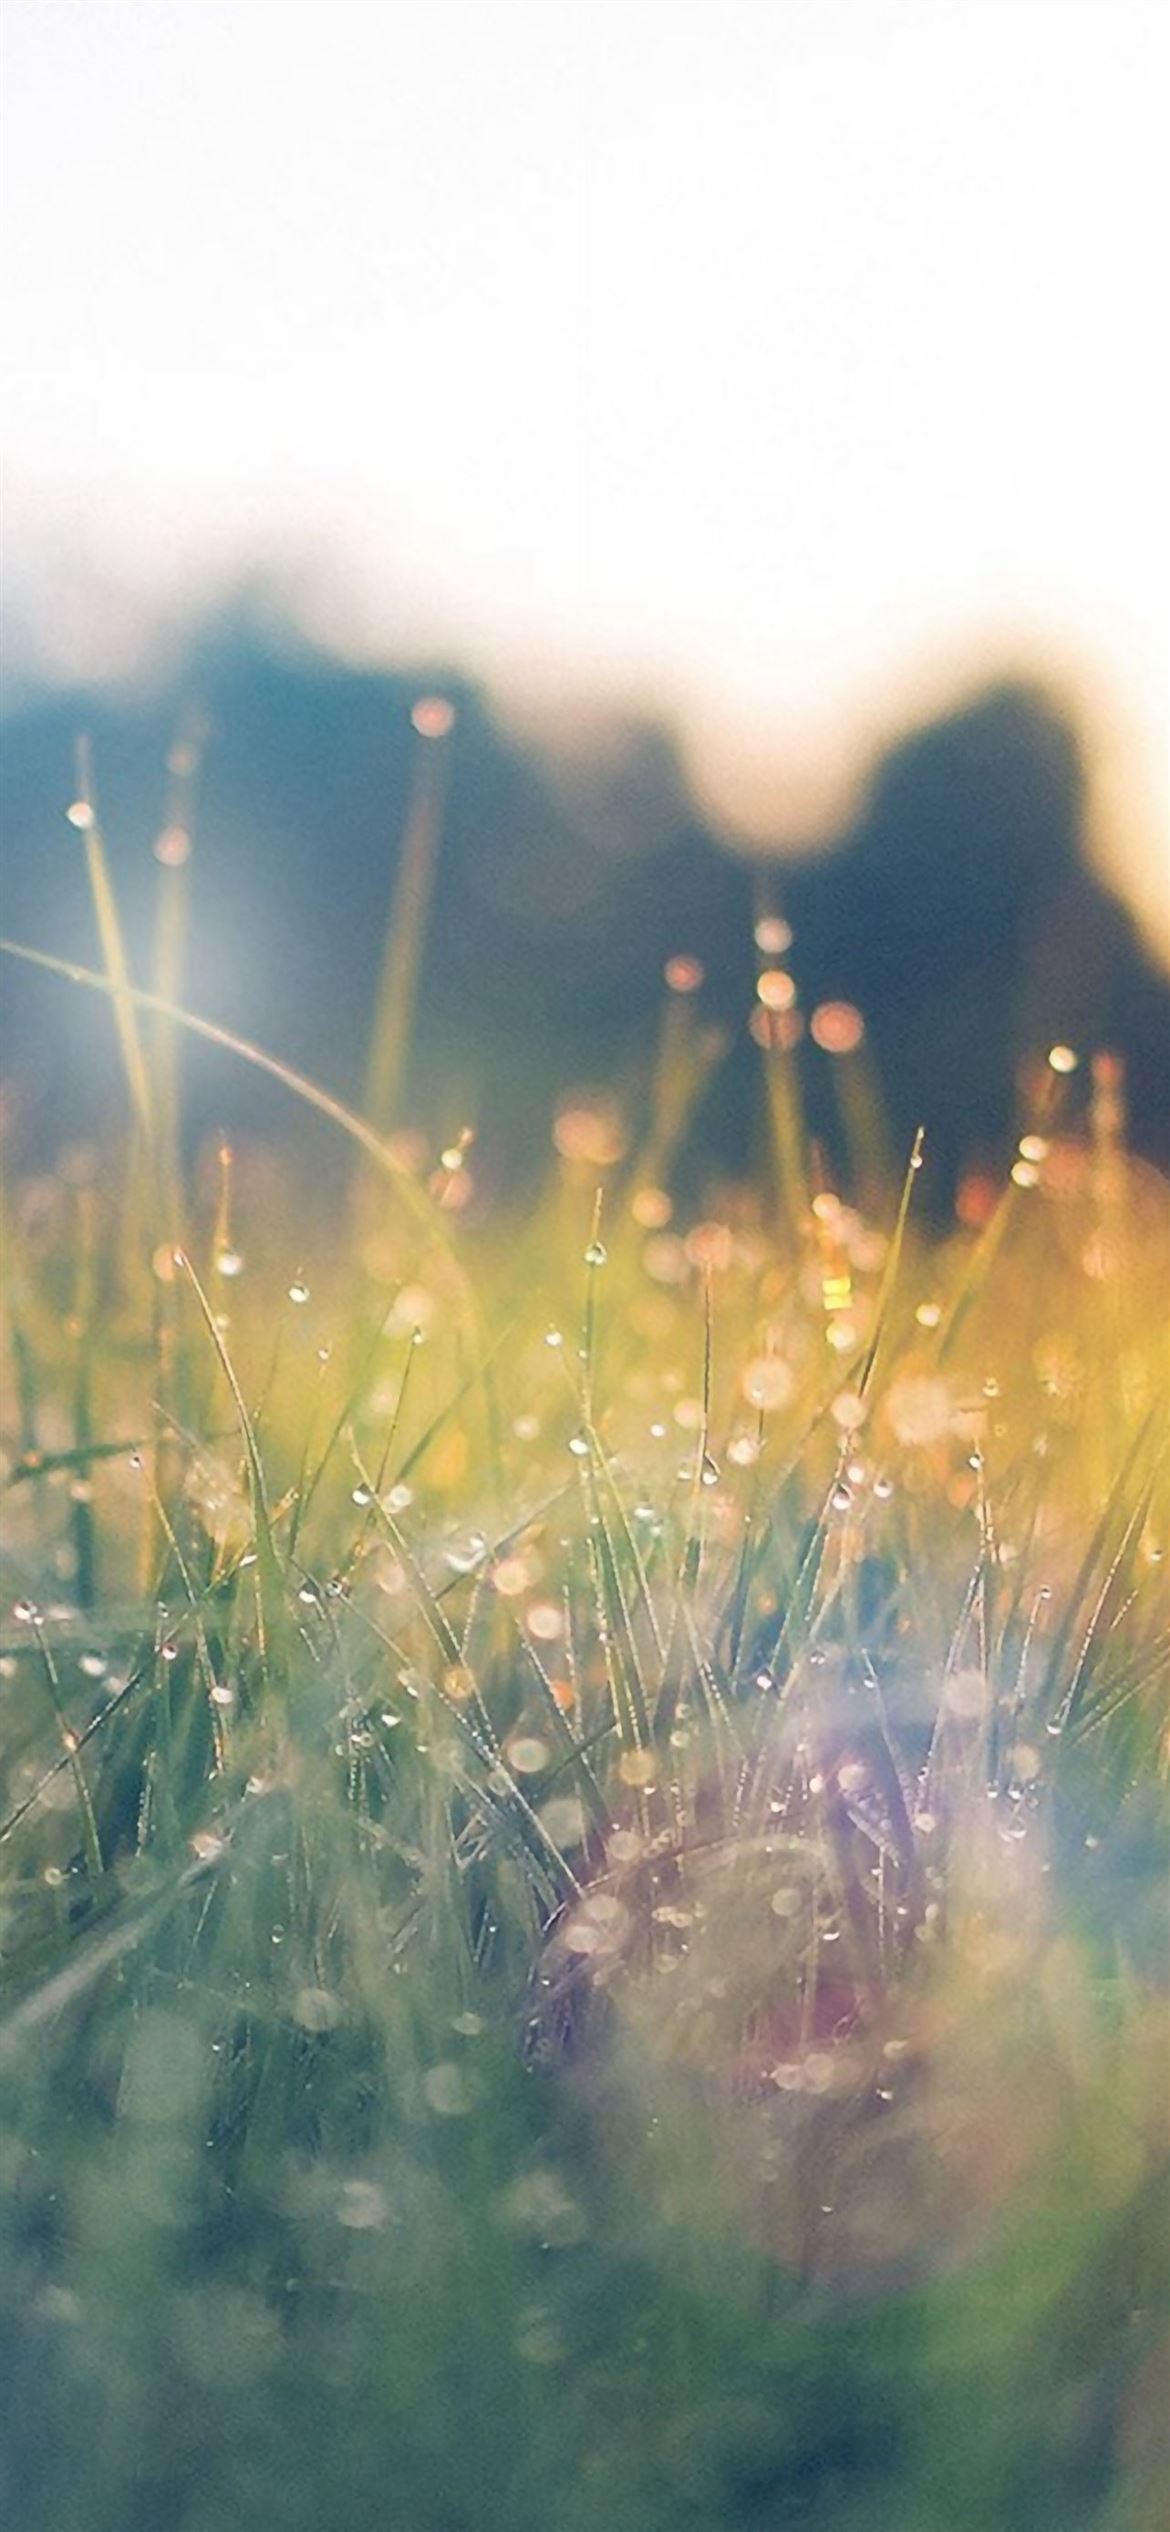 Lawn Green Nature Sunset Light Bokeh Spring Flare Happy iPhone Wallpaper Free Download